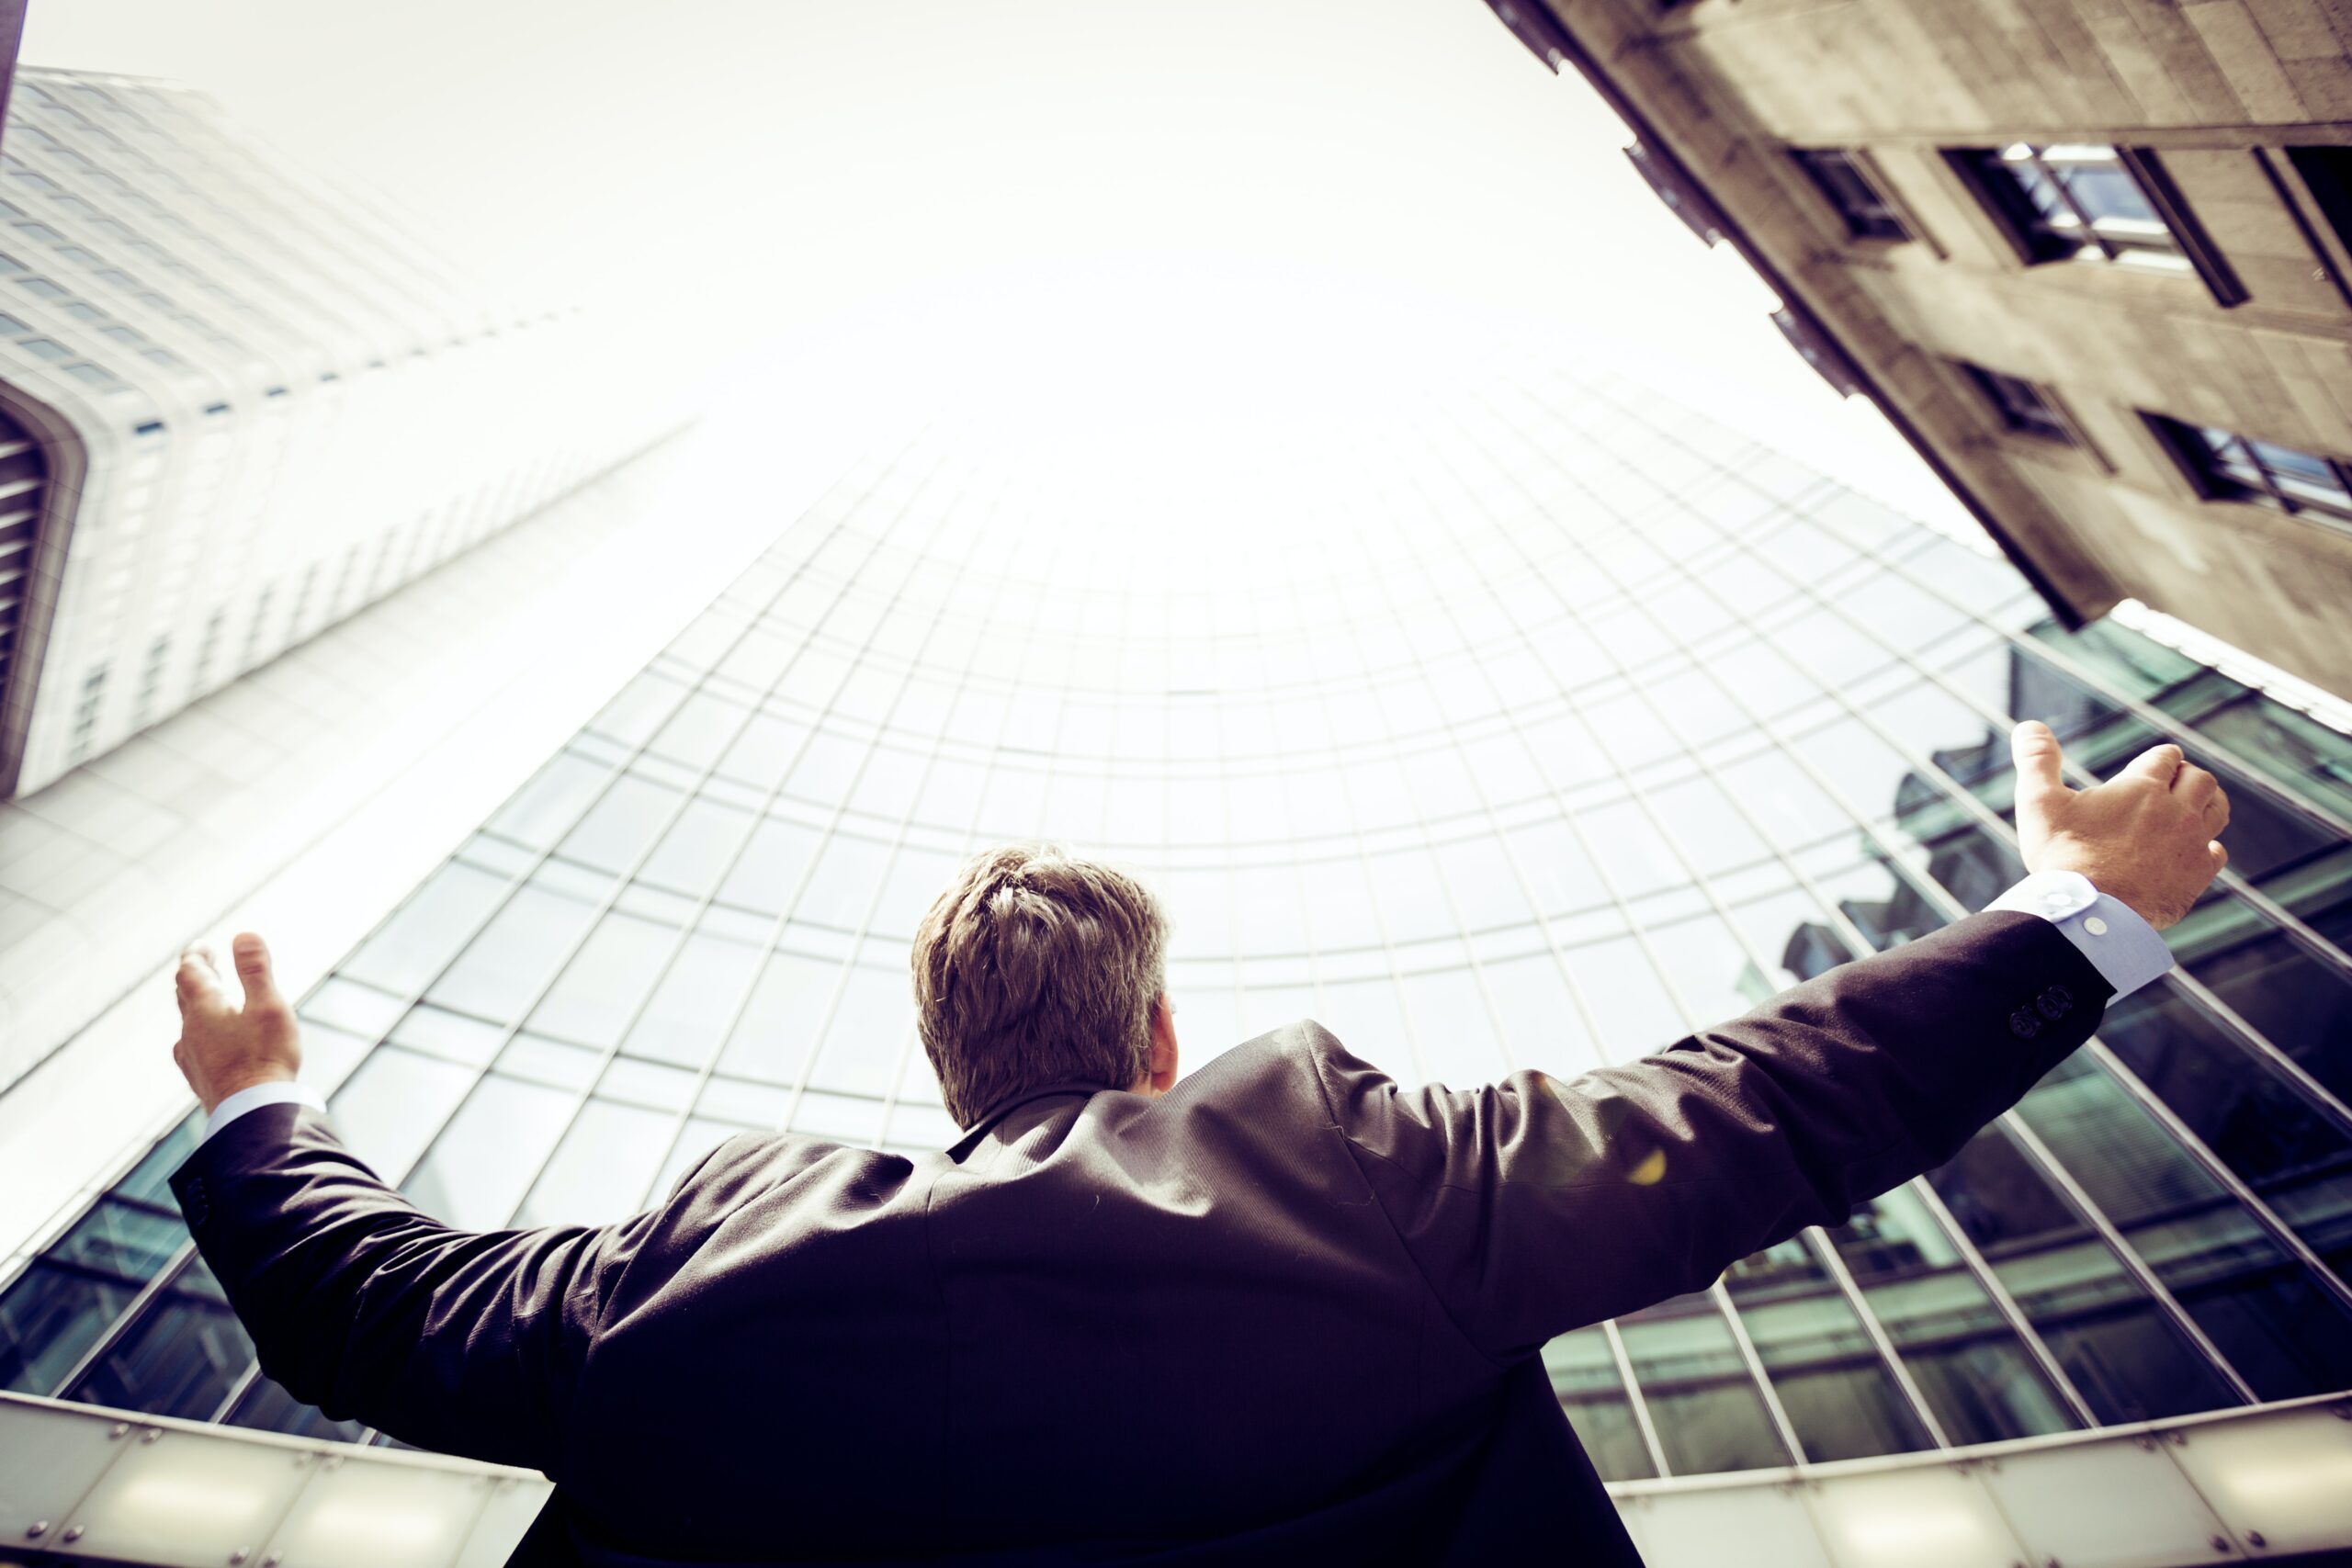 A business owner in a suit stands with his back to the camera, arms raised in a victorious or celebratory gesture, against the backdrop of modern high-rise buildings.